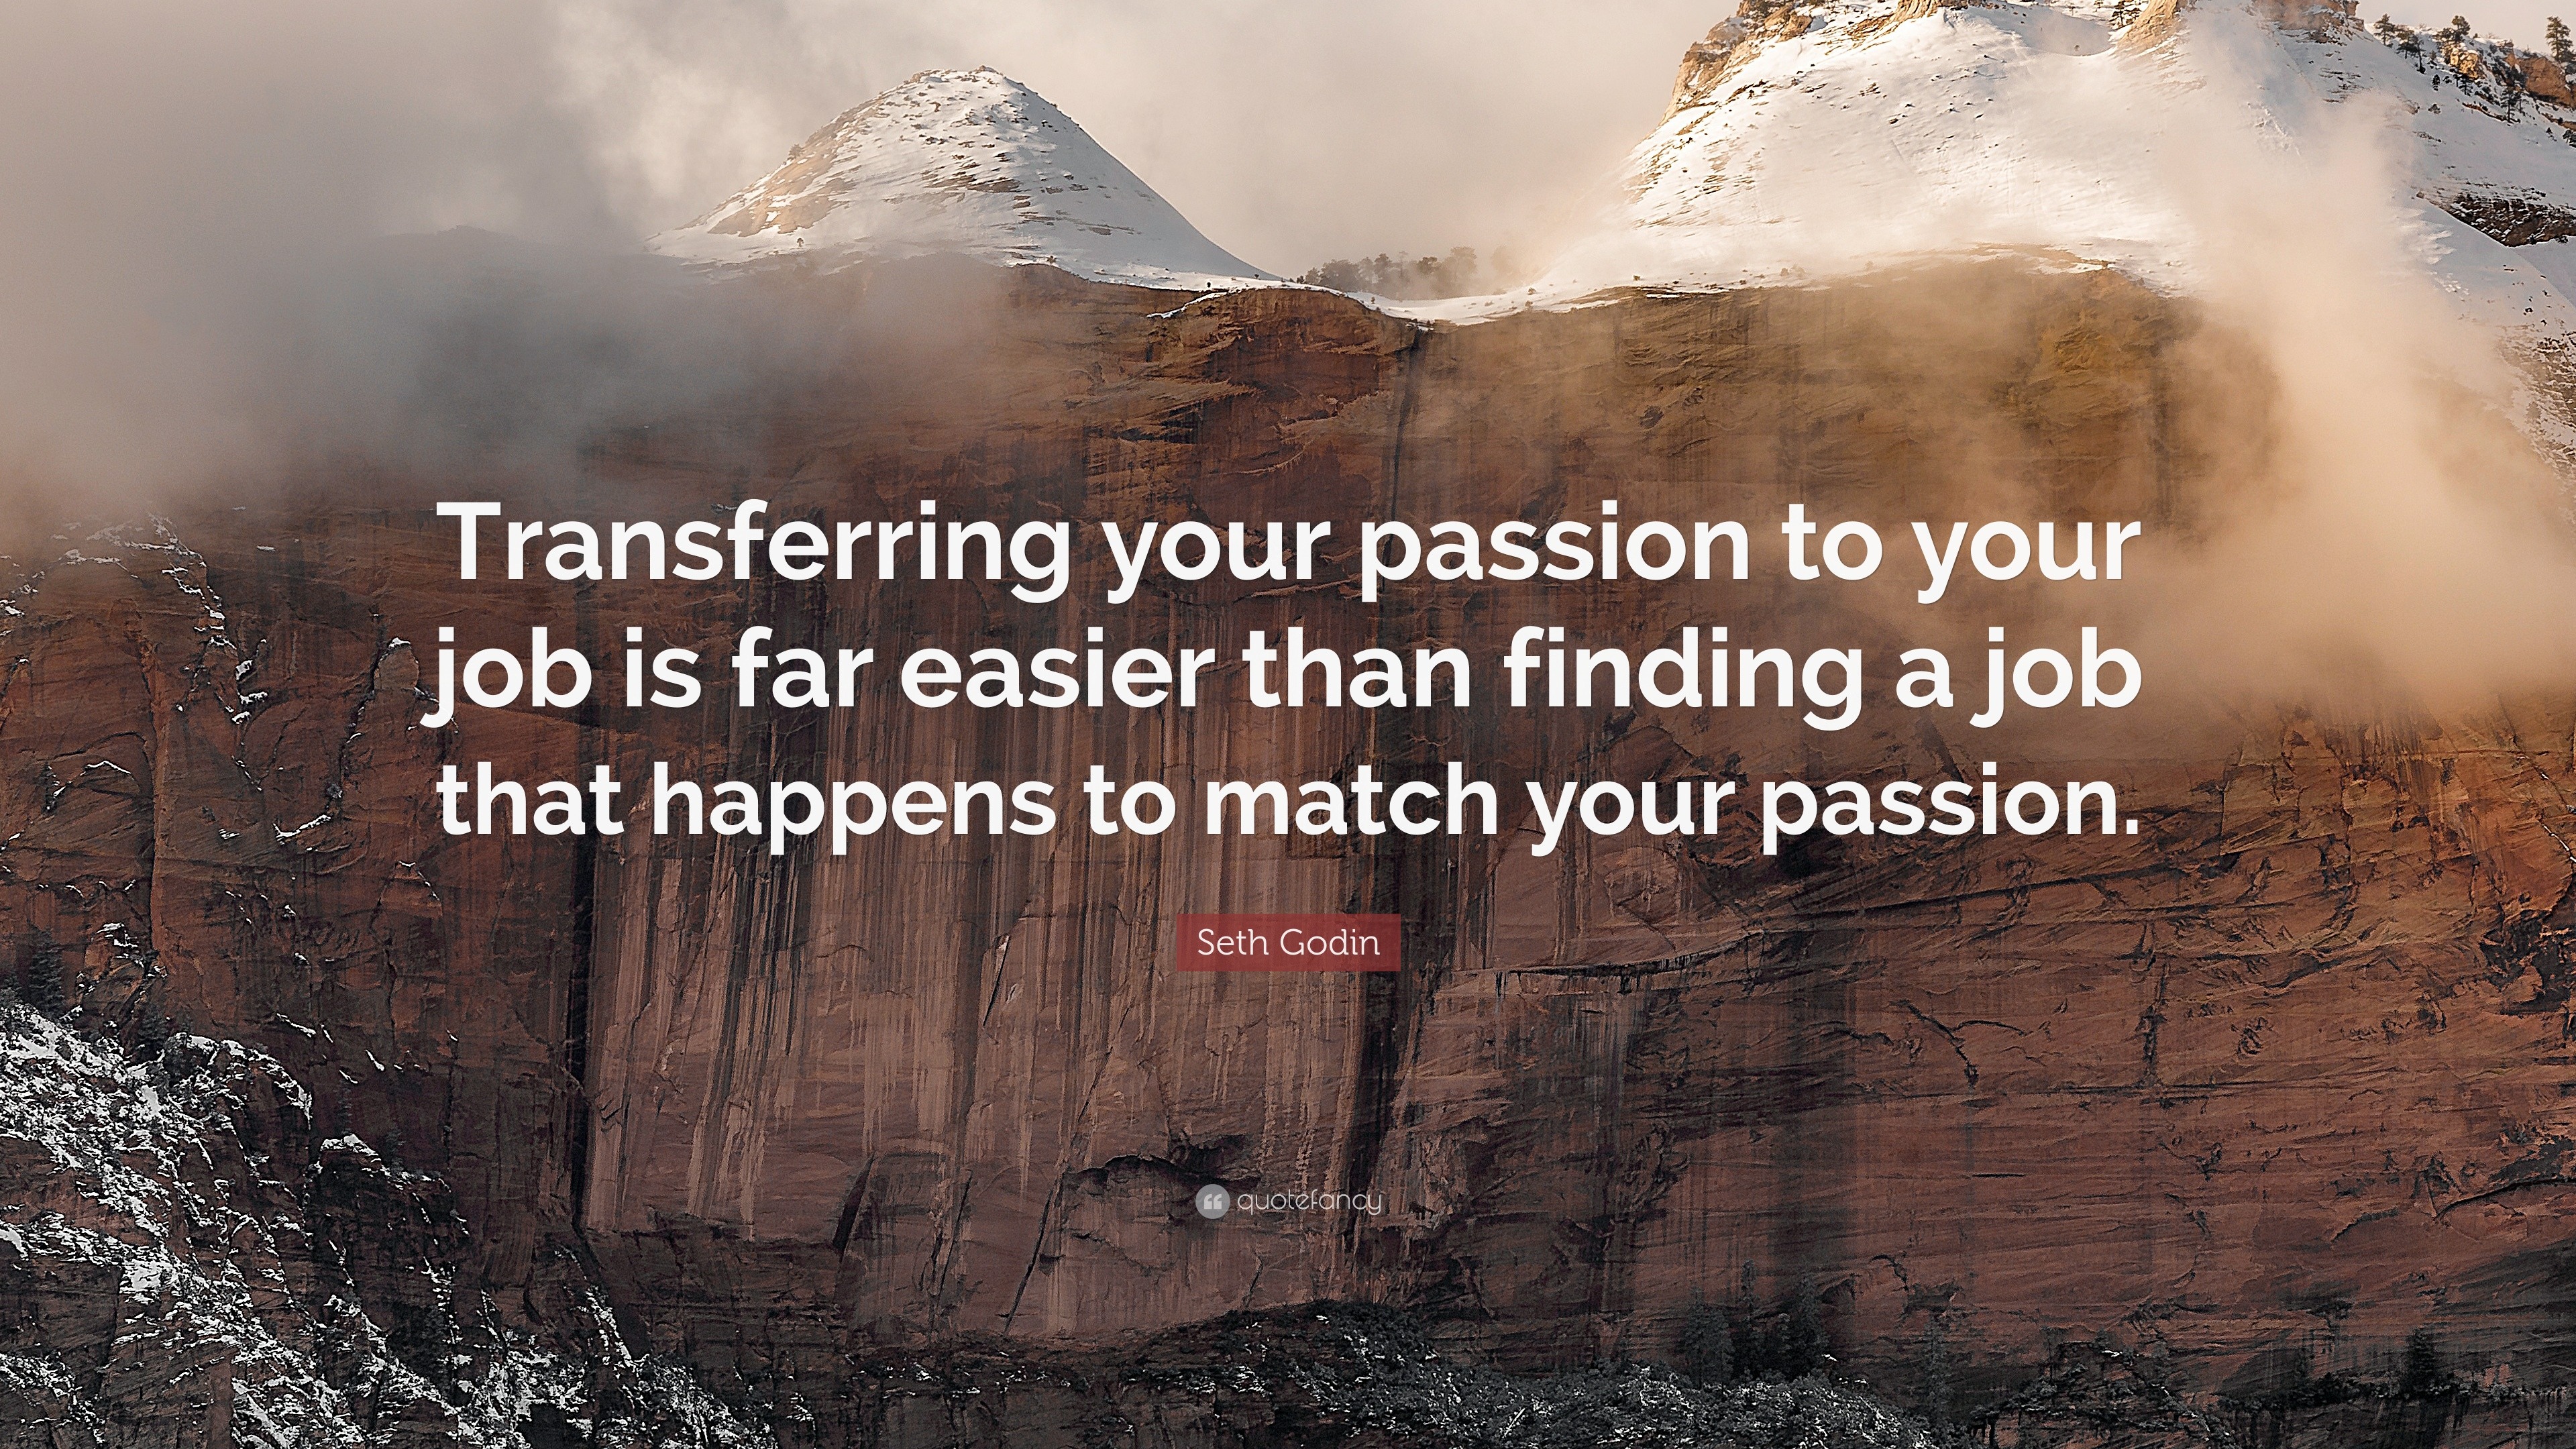 Seth Godin Quote “transferring Your Passion To Your Job Is Far Easier Than Finding A Job That 